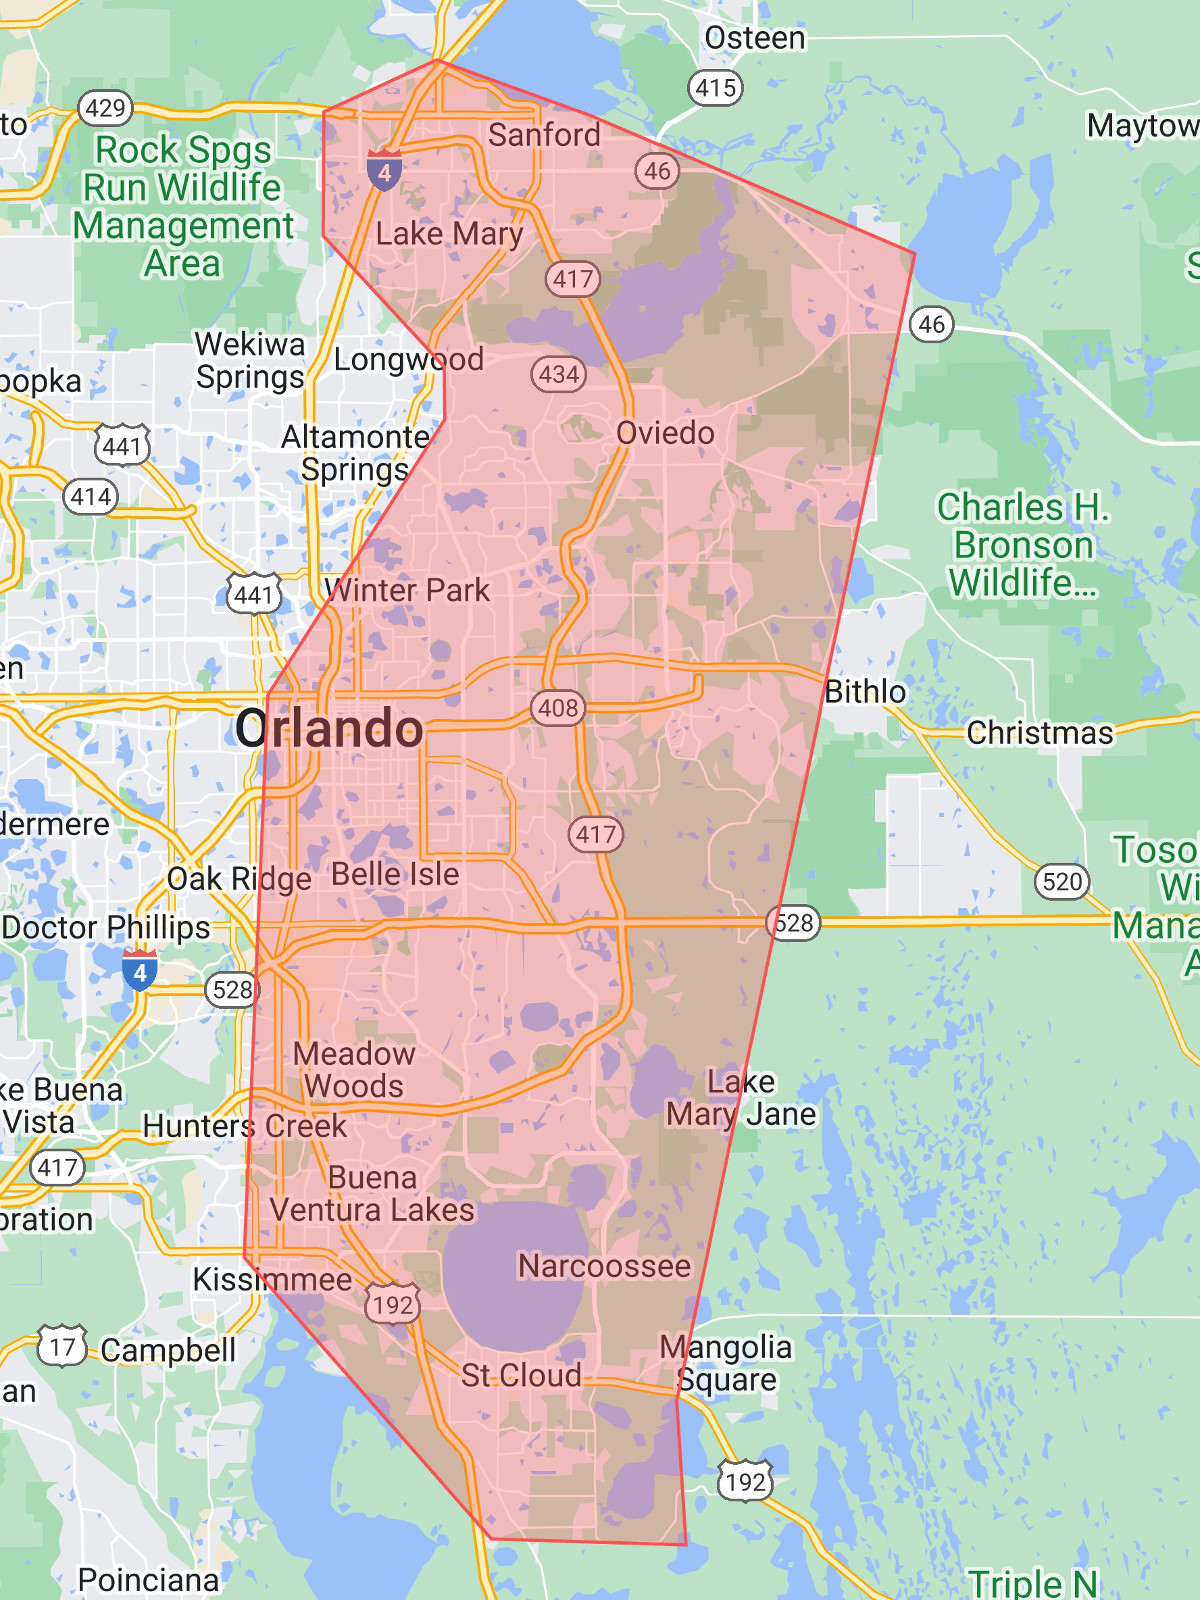 Local Wholesale Bread Suppliers Delivery Area For DK Bread Delivery, including Sanford, Lake Mary, Lake Nona, Oviedo, Kissimmee, St. Cloud, and South Orlando.